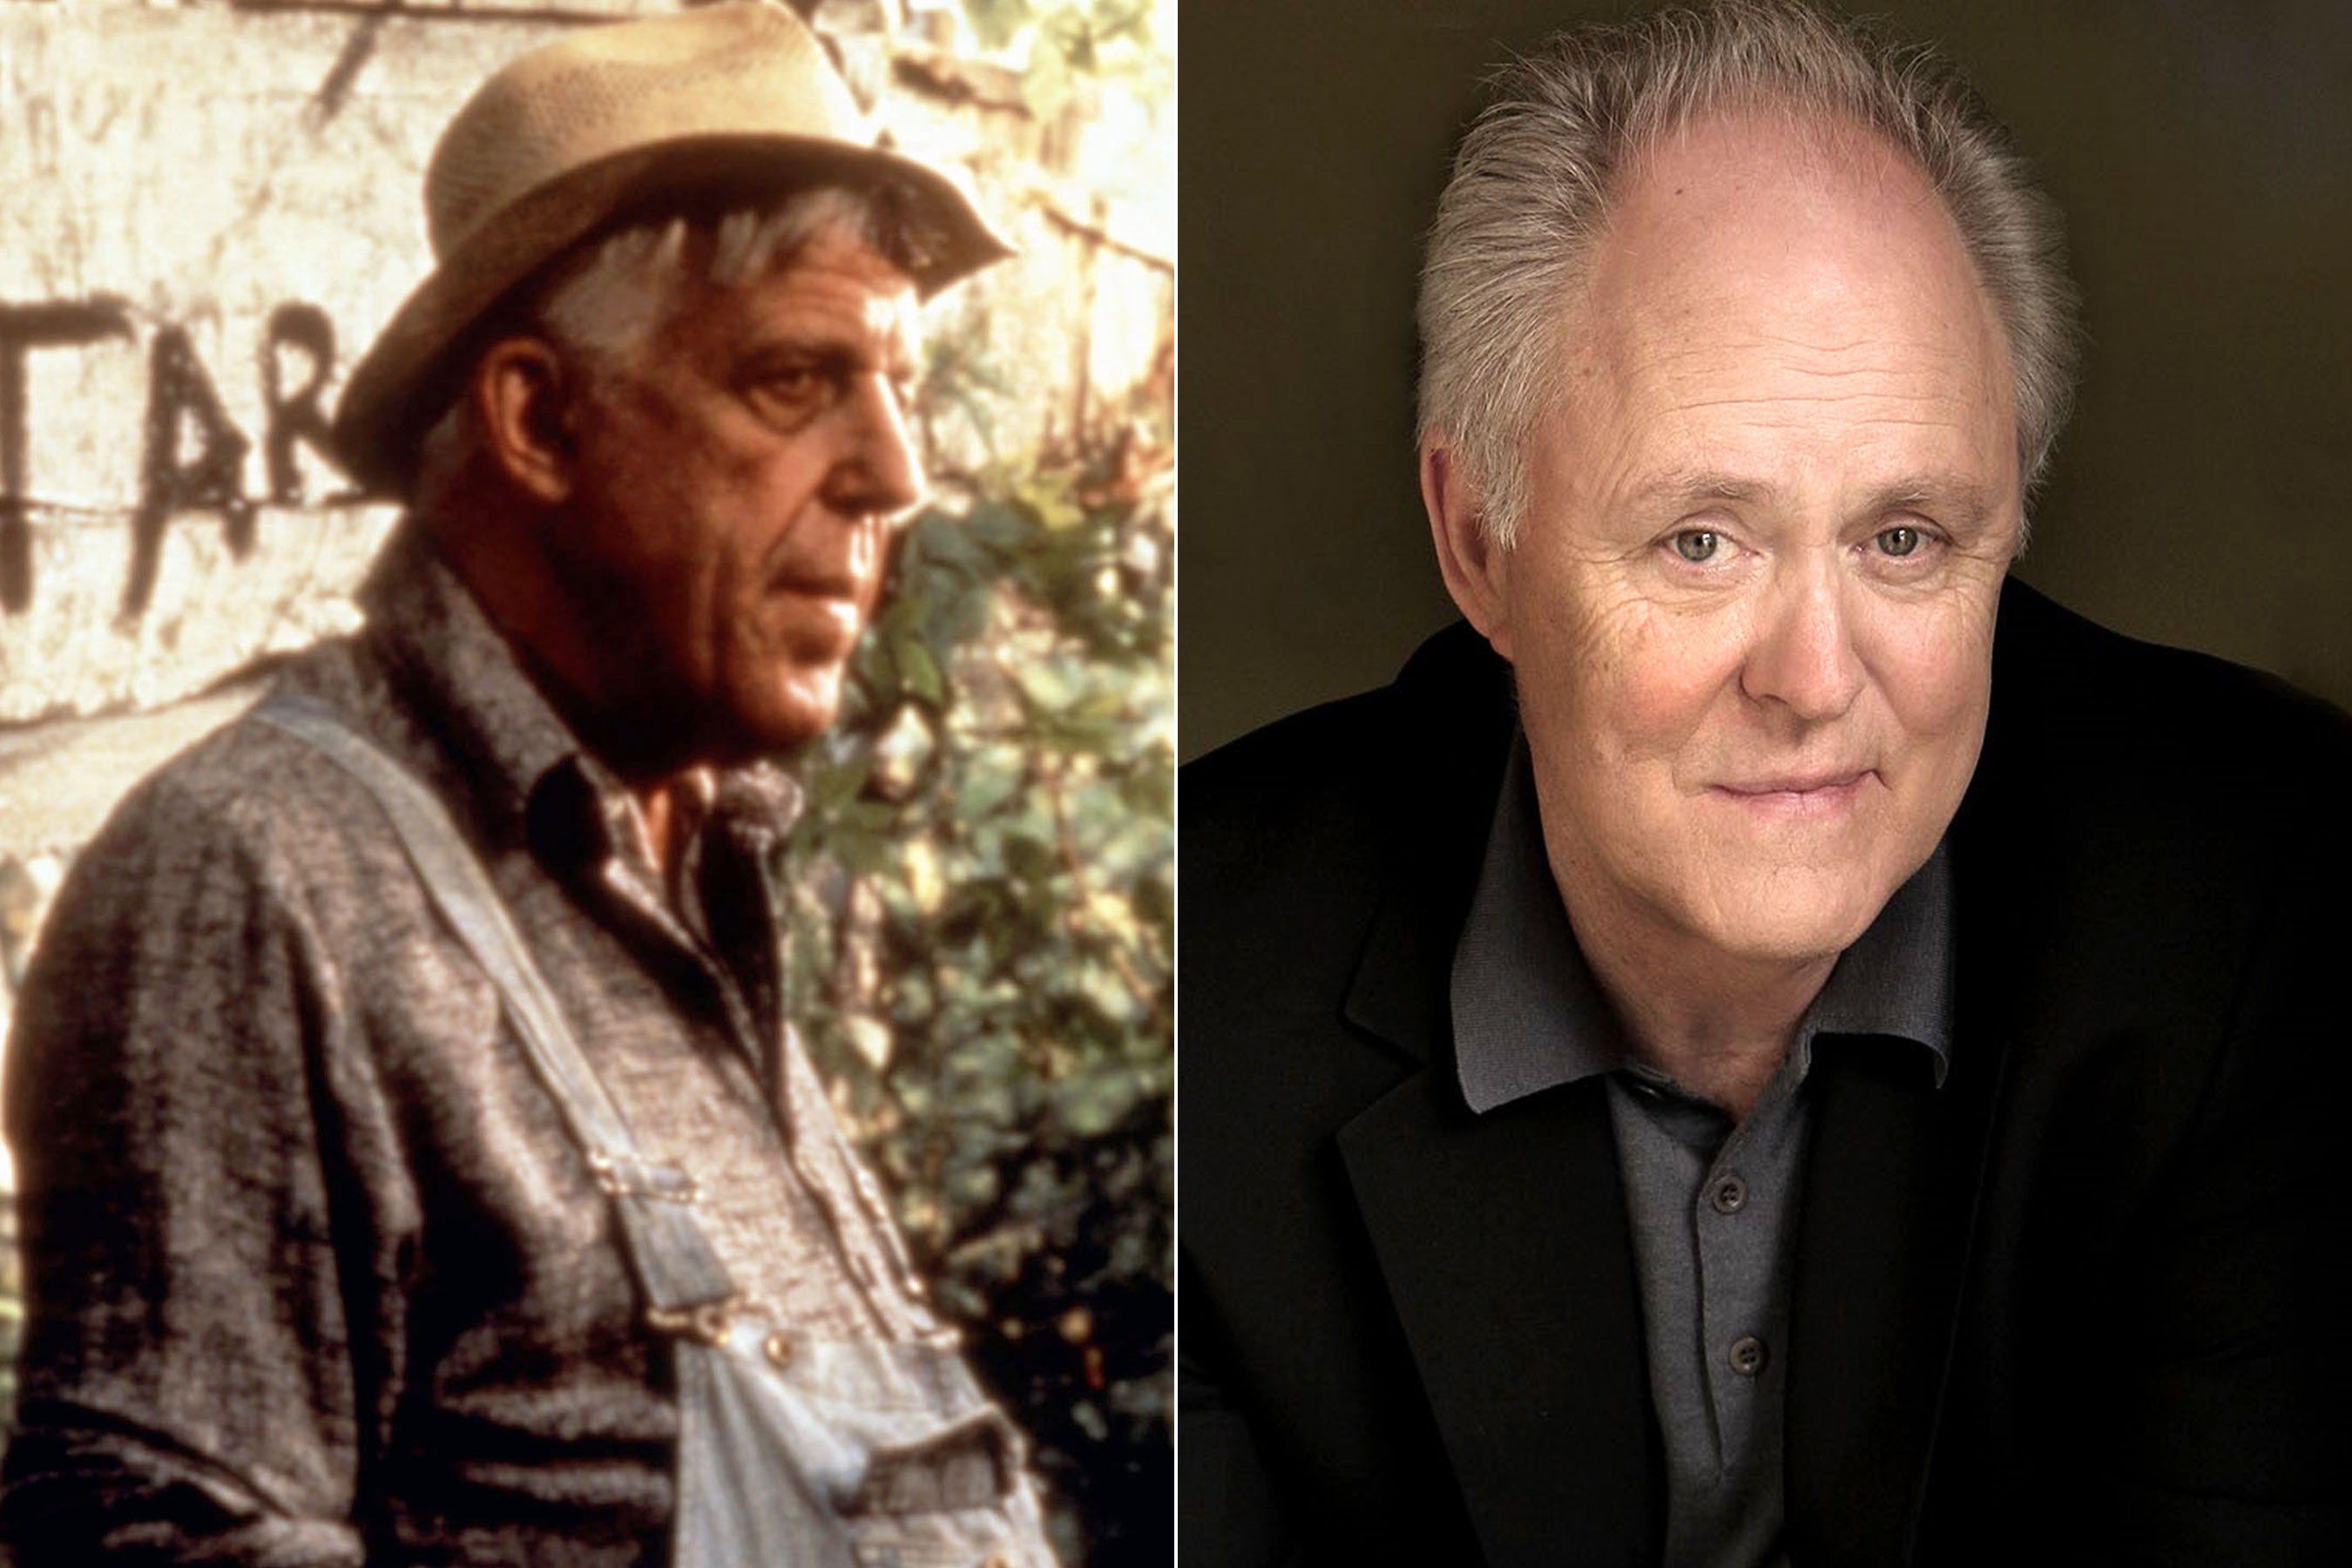 John Lithgow has some big shoes to fill as Jud Crandall